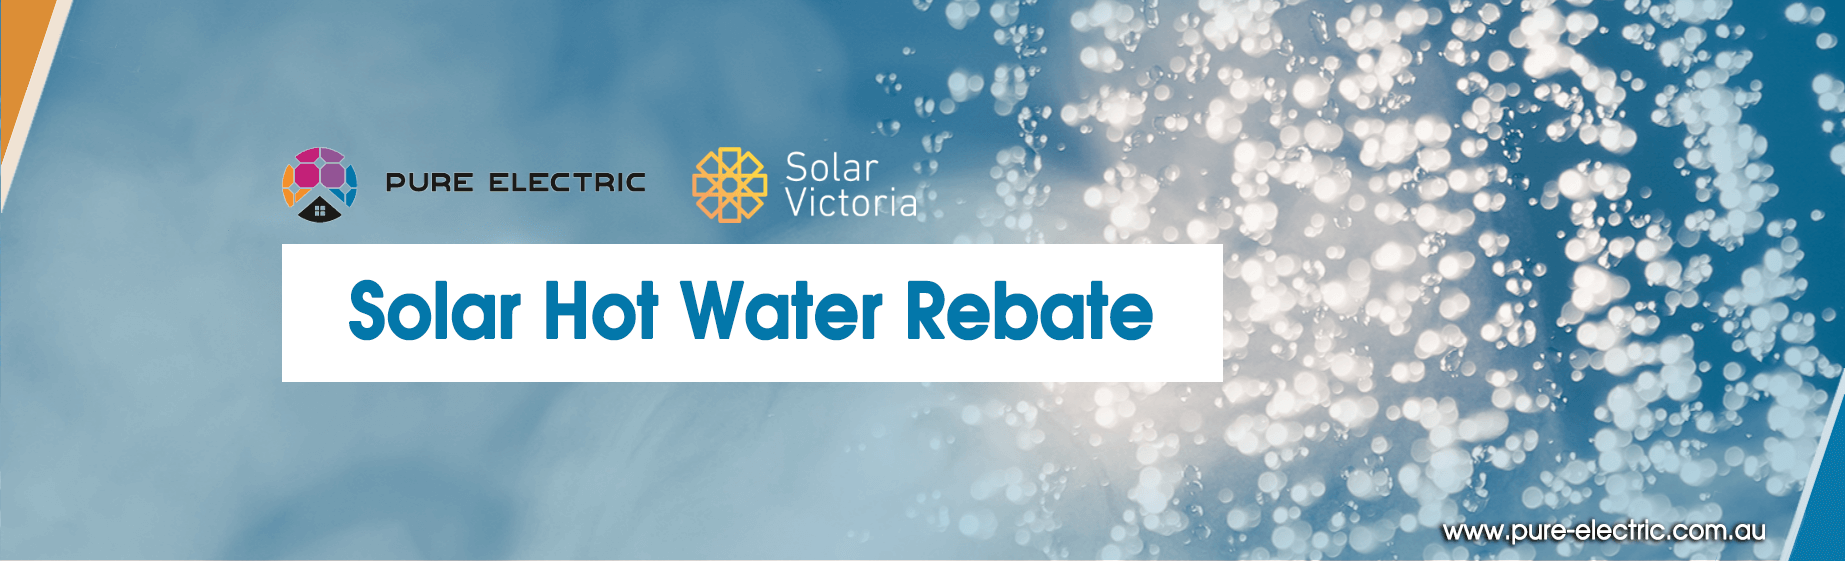 solar-victoria-solar-hot-water-rebate-up-to-1000-for-vic-customers-installing-sanden-eco-heat